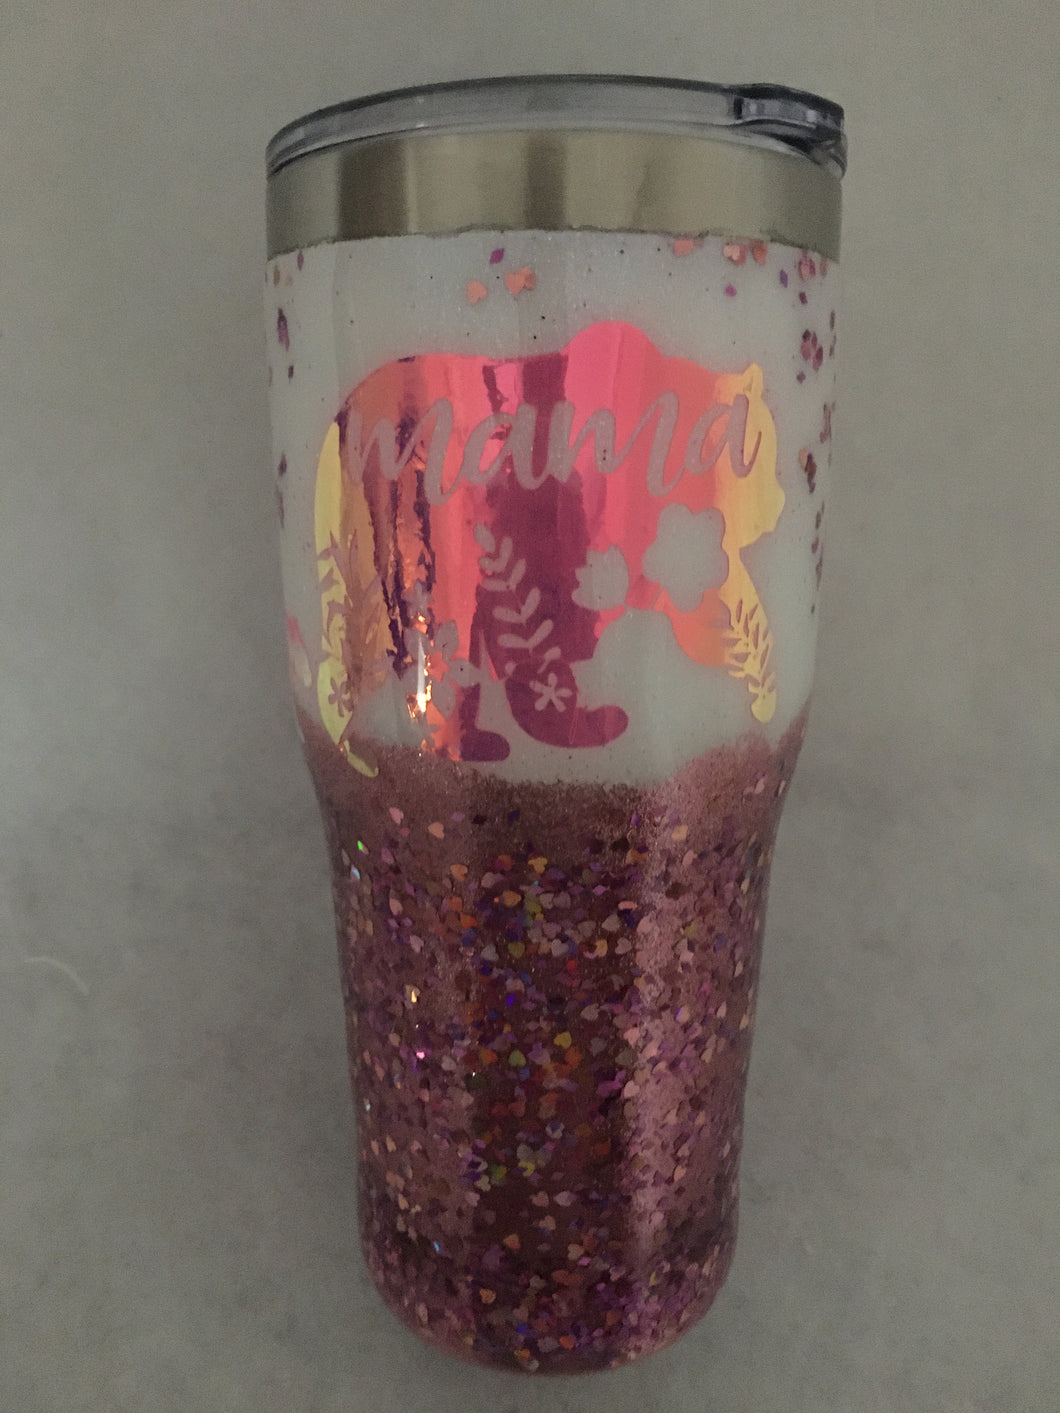 Mama Tumbler is a Perfect gift for a New mom, Adopting mom, a New baby, a baby shower, mom to be, or for that special mama. We also make these for our fur baby mommas. We can custom design with baby bears, and photos and customize for a Nana as well. This stainless tumbler is great for any hot or cold drink and can hold 30 fluid ounces and comes with a lid. It is decorated with vinyl, glitter, and resin. These tumblers can be ready in one to two weeks. Please select a different color in the dropdown.